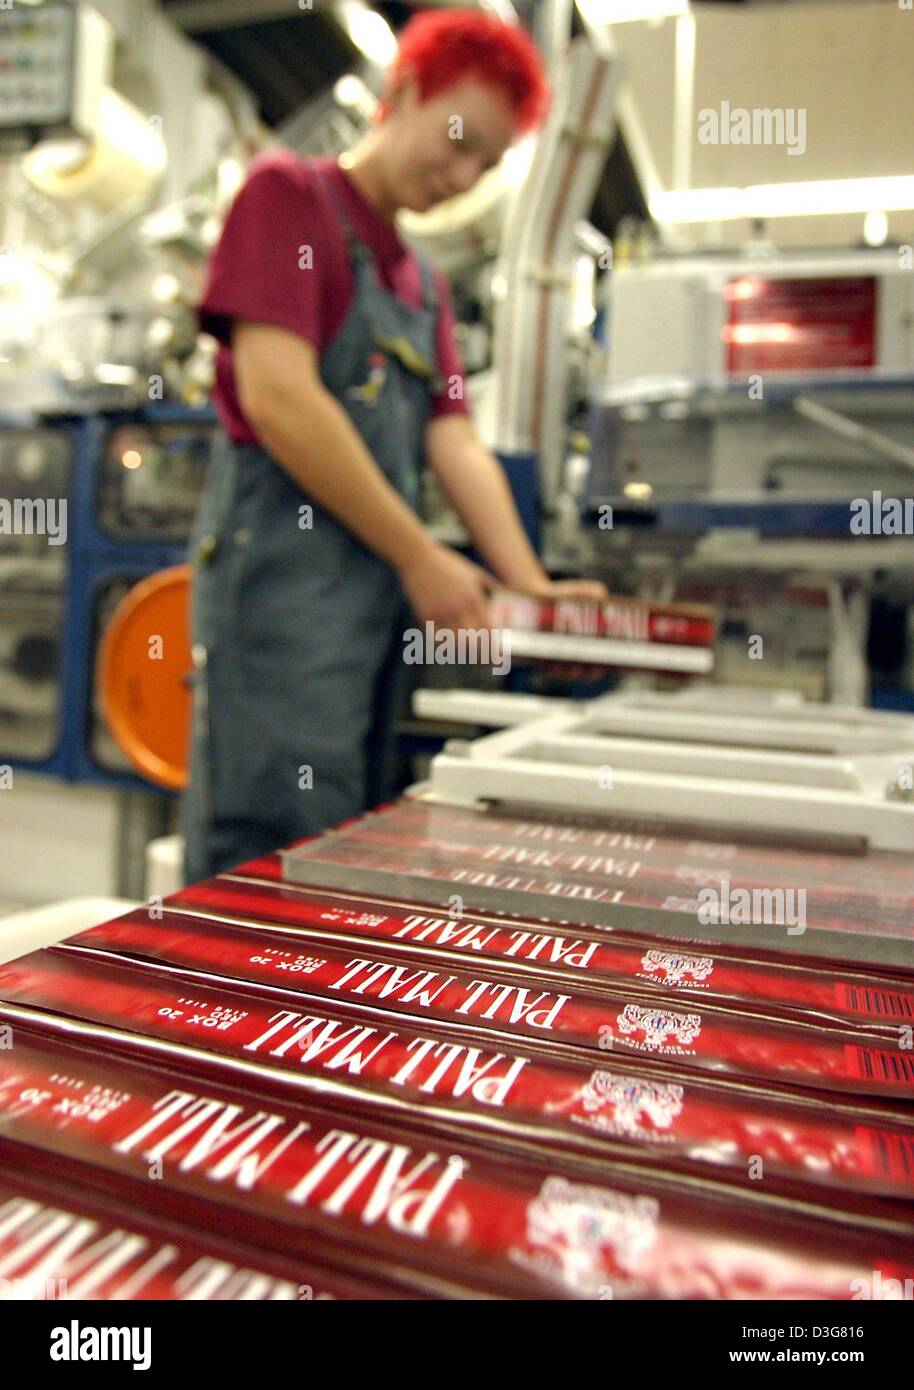 (dpa) - An employee of British American Tobacco works on a packaging line for carton of cigarettes of the brand Pall Mall, in Bayreuth, Germany, 24 October 2003. A carton consists 10 packets of cigarettes. 1,200 employees produce 32 million cigarettes every year. The main brands are Lucky Strike, Pall Mall and HB. Stock Photo